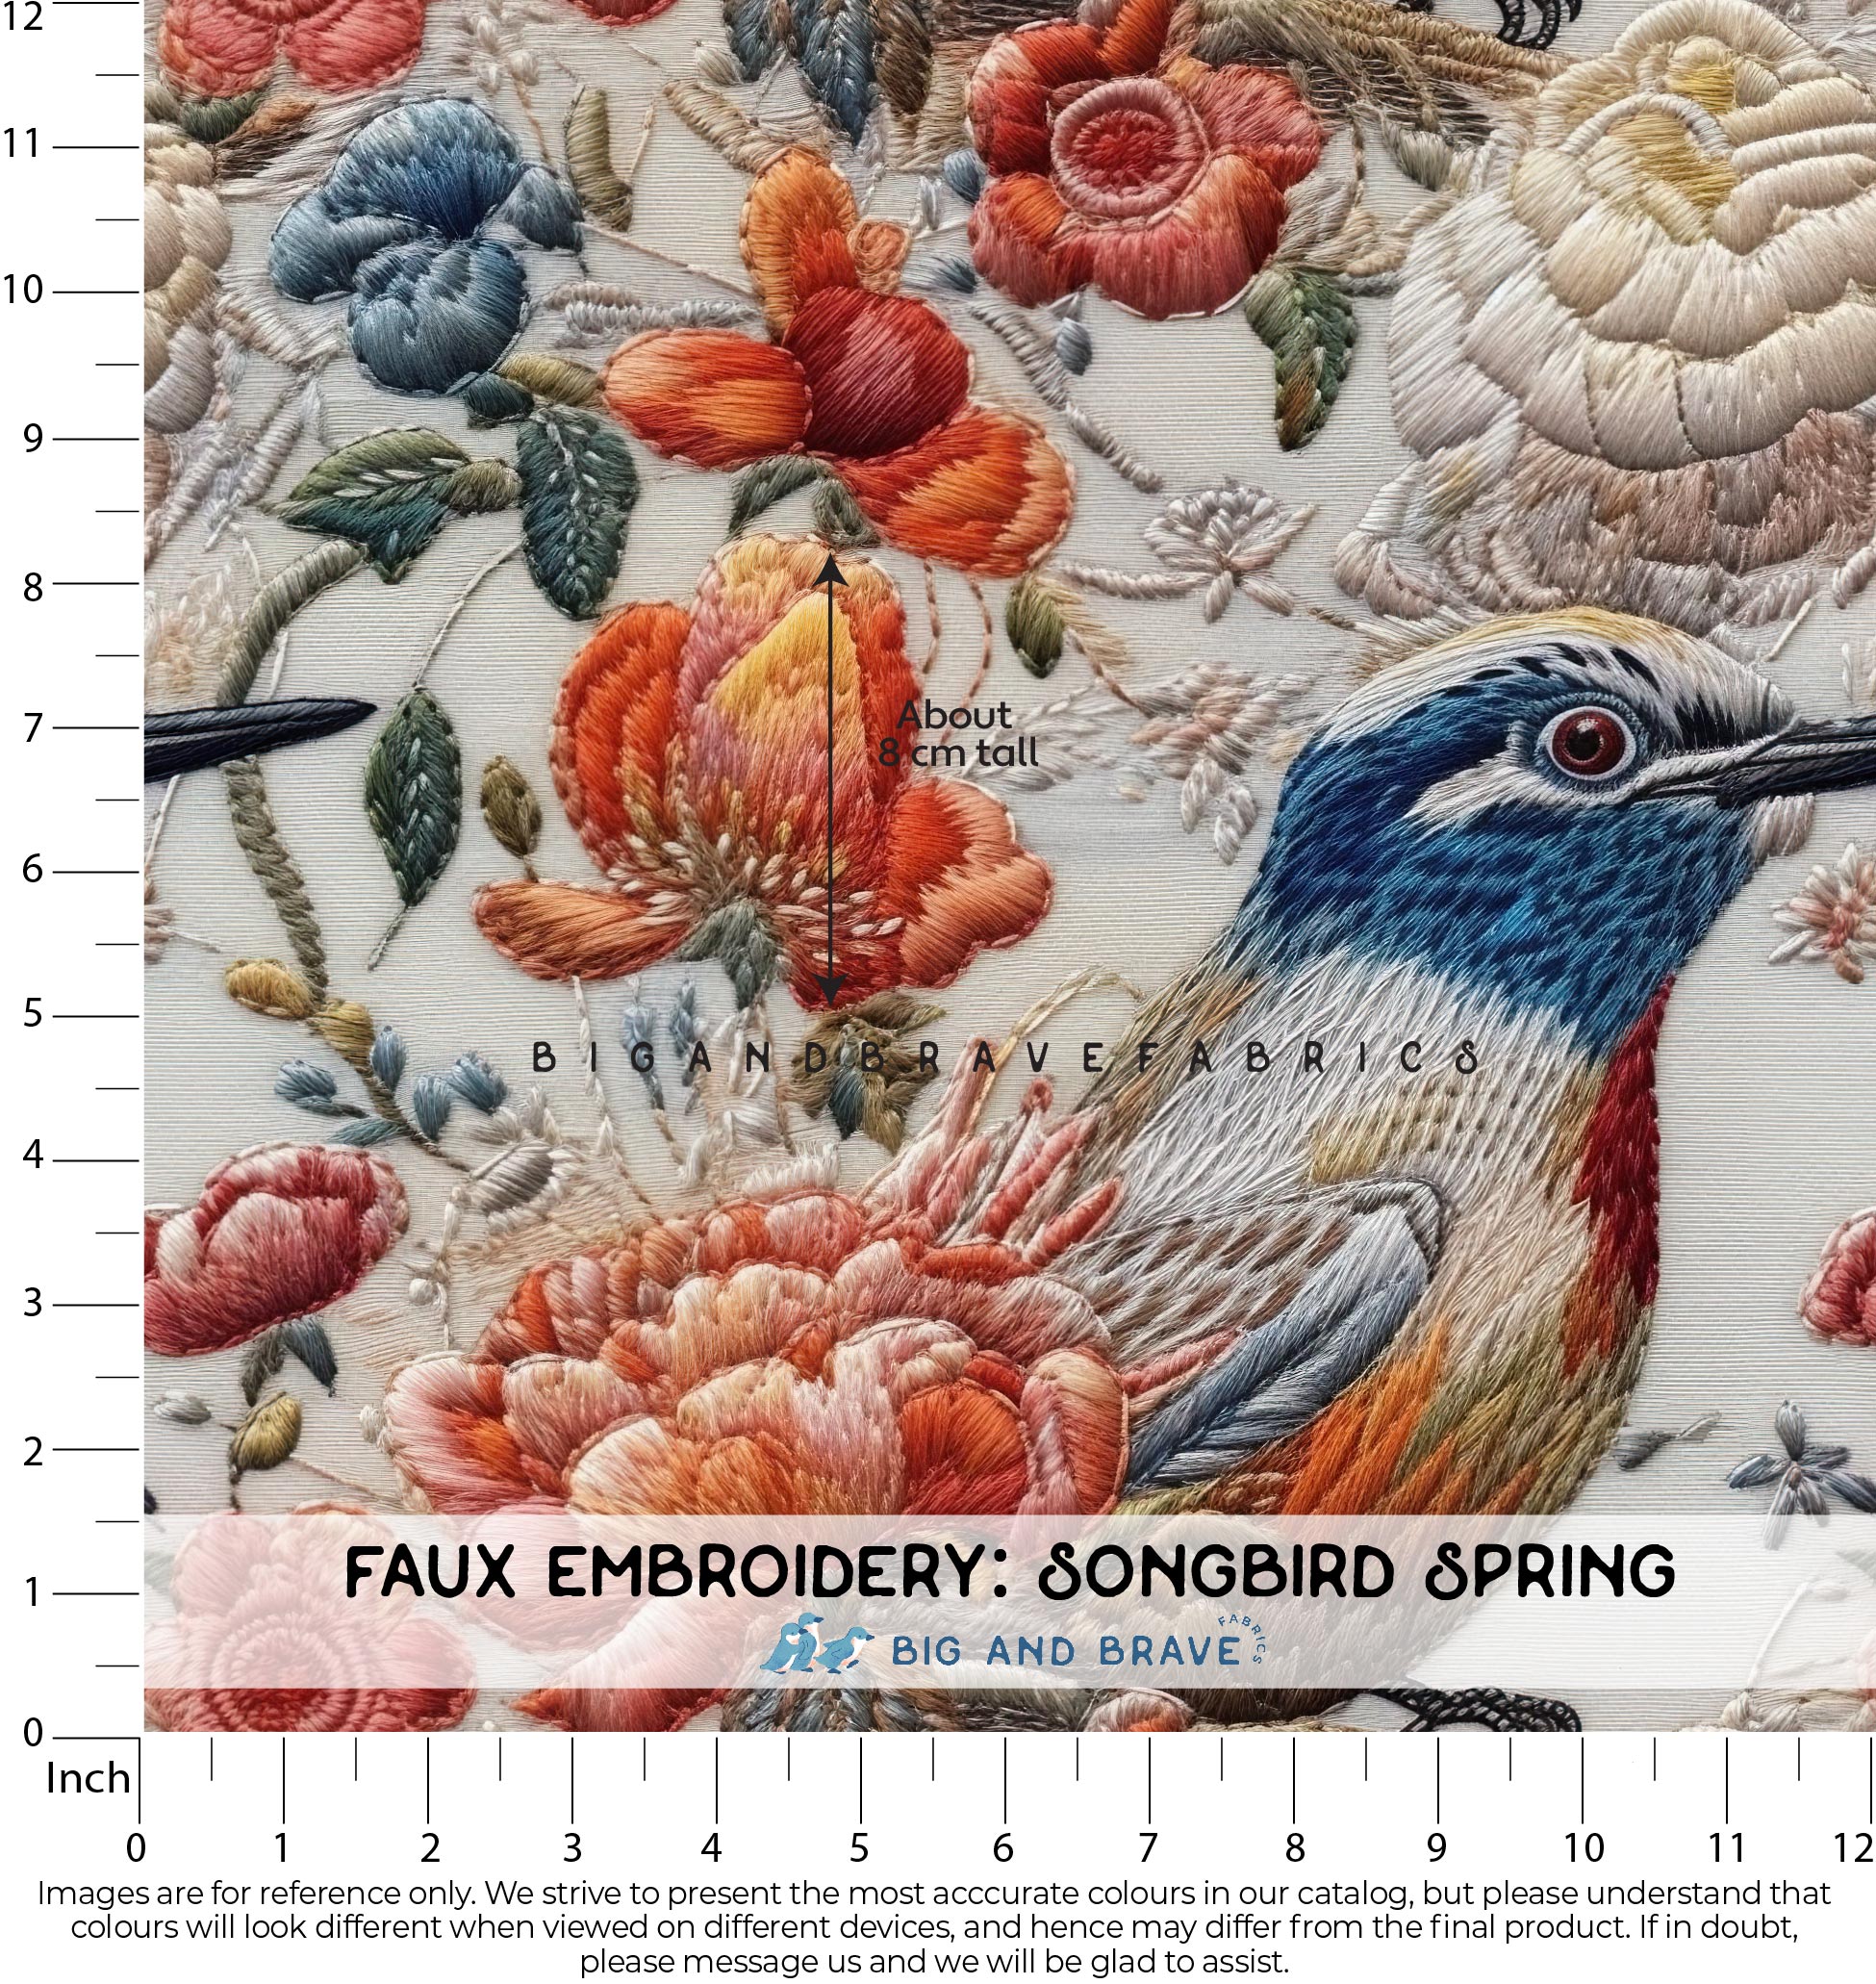 Faux Embroidery, Songbird Spring